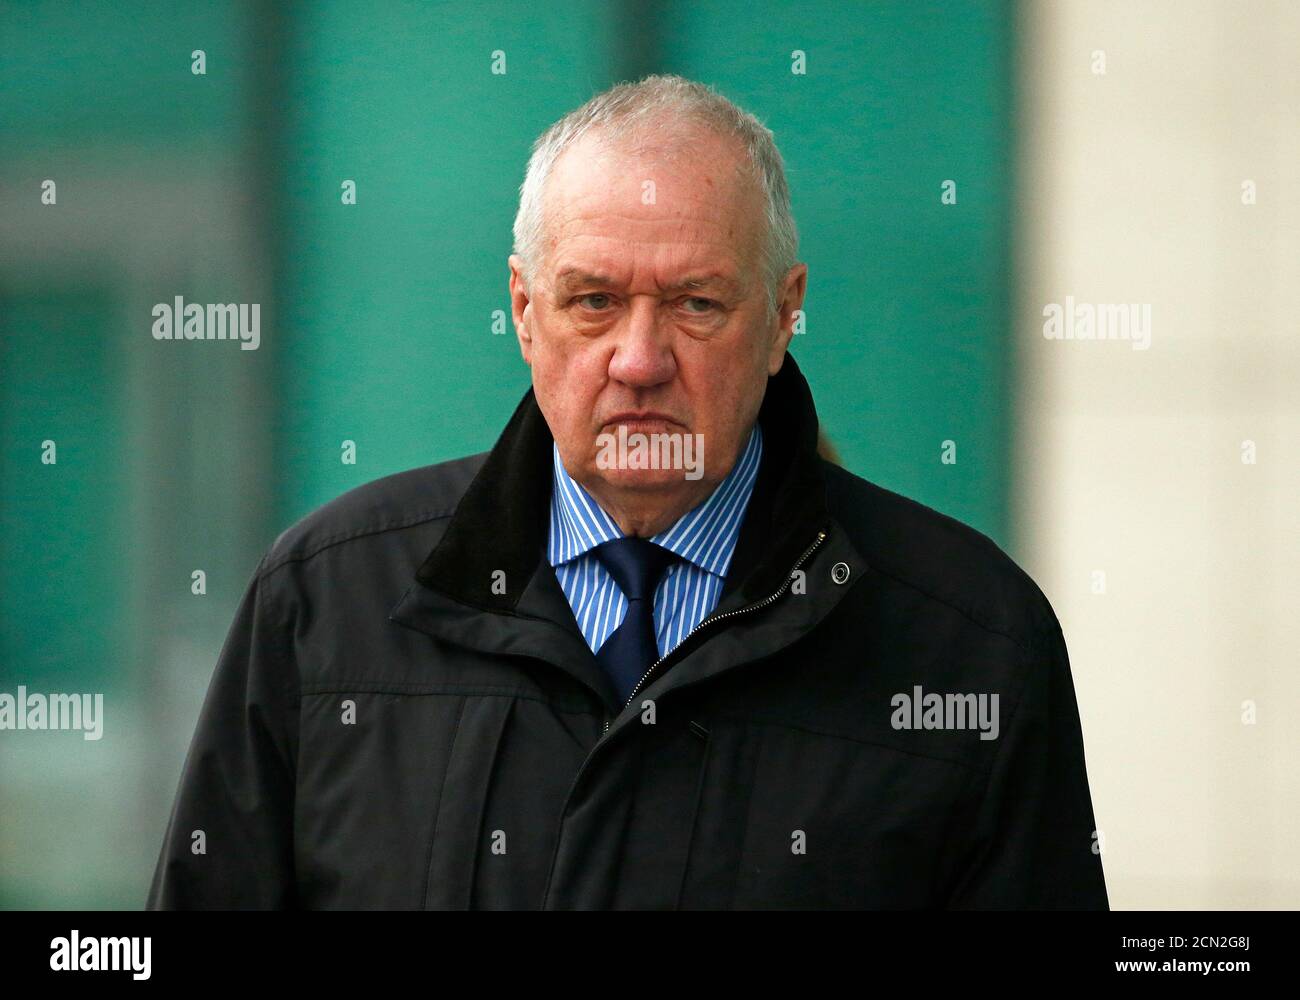 Former Chief Superintendent of South Yorkshire Police, David Duckenfield, leaves after giving evidence to the Hillsborough Inquest in Warrington, northern England March 12, 2015. Duckenfield was match commander at the 1989 Hillsborough disaster, that claimed the lives of 96 men, women and children.  REUTERS/Phil Noble/File Photo Stock Photo